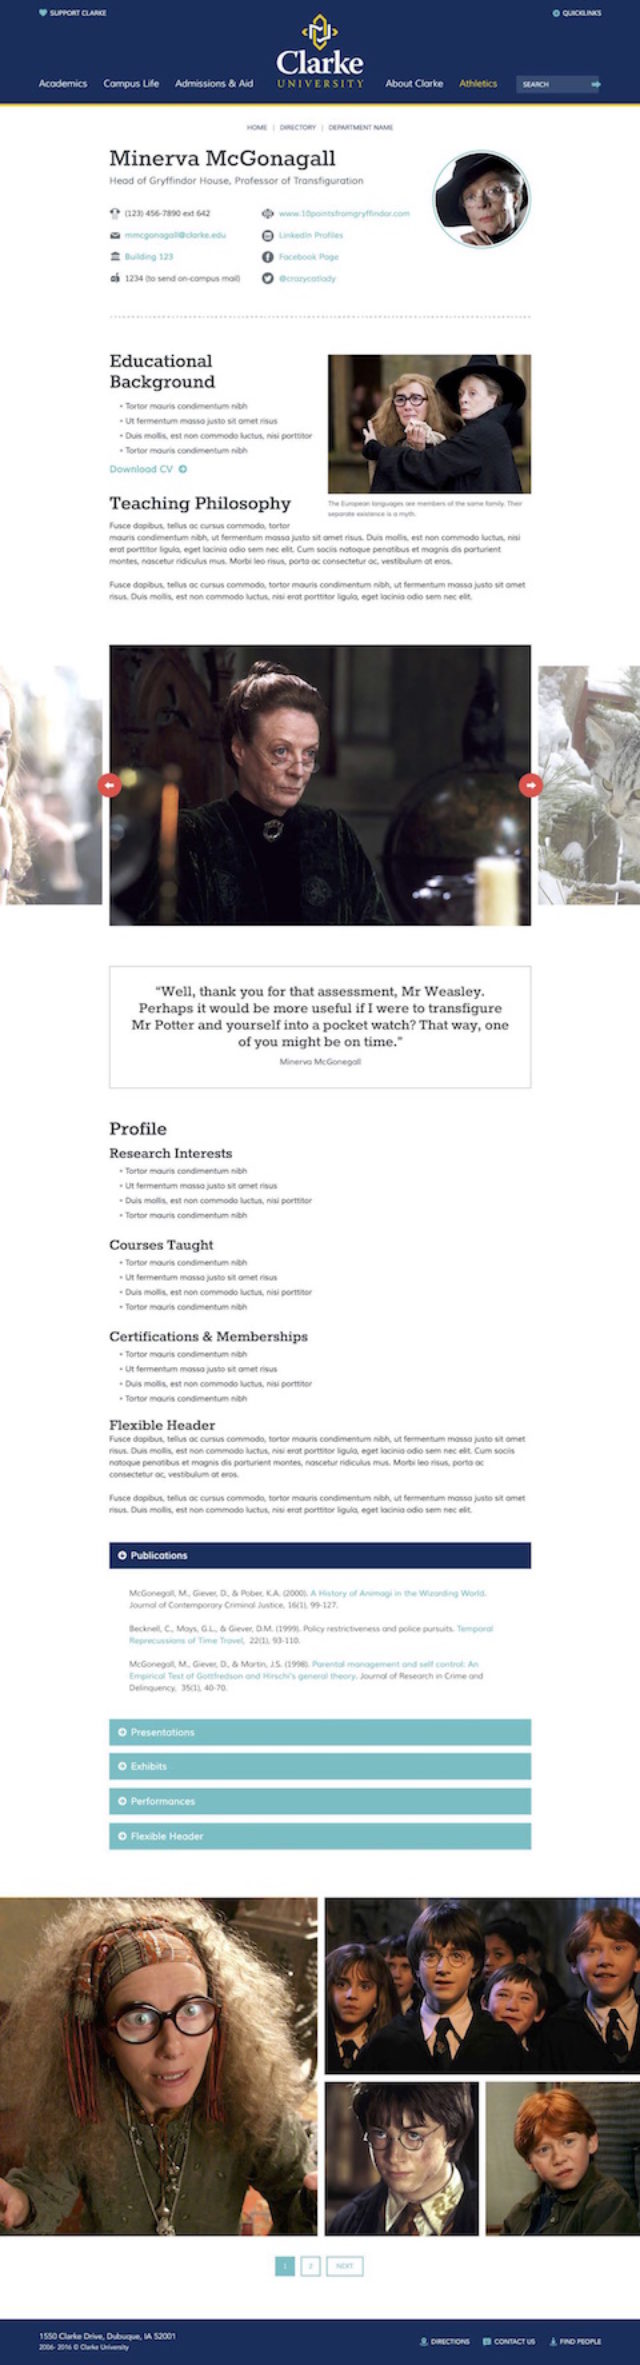 Profile page template